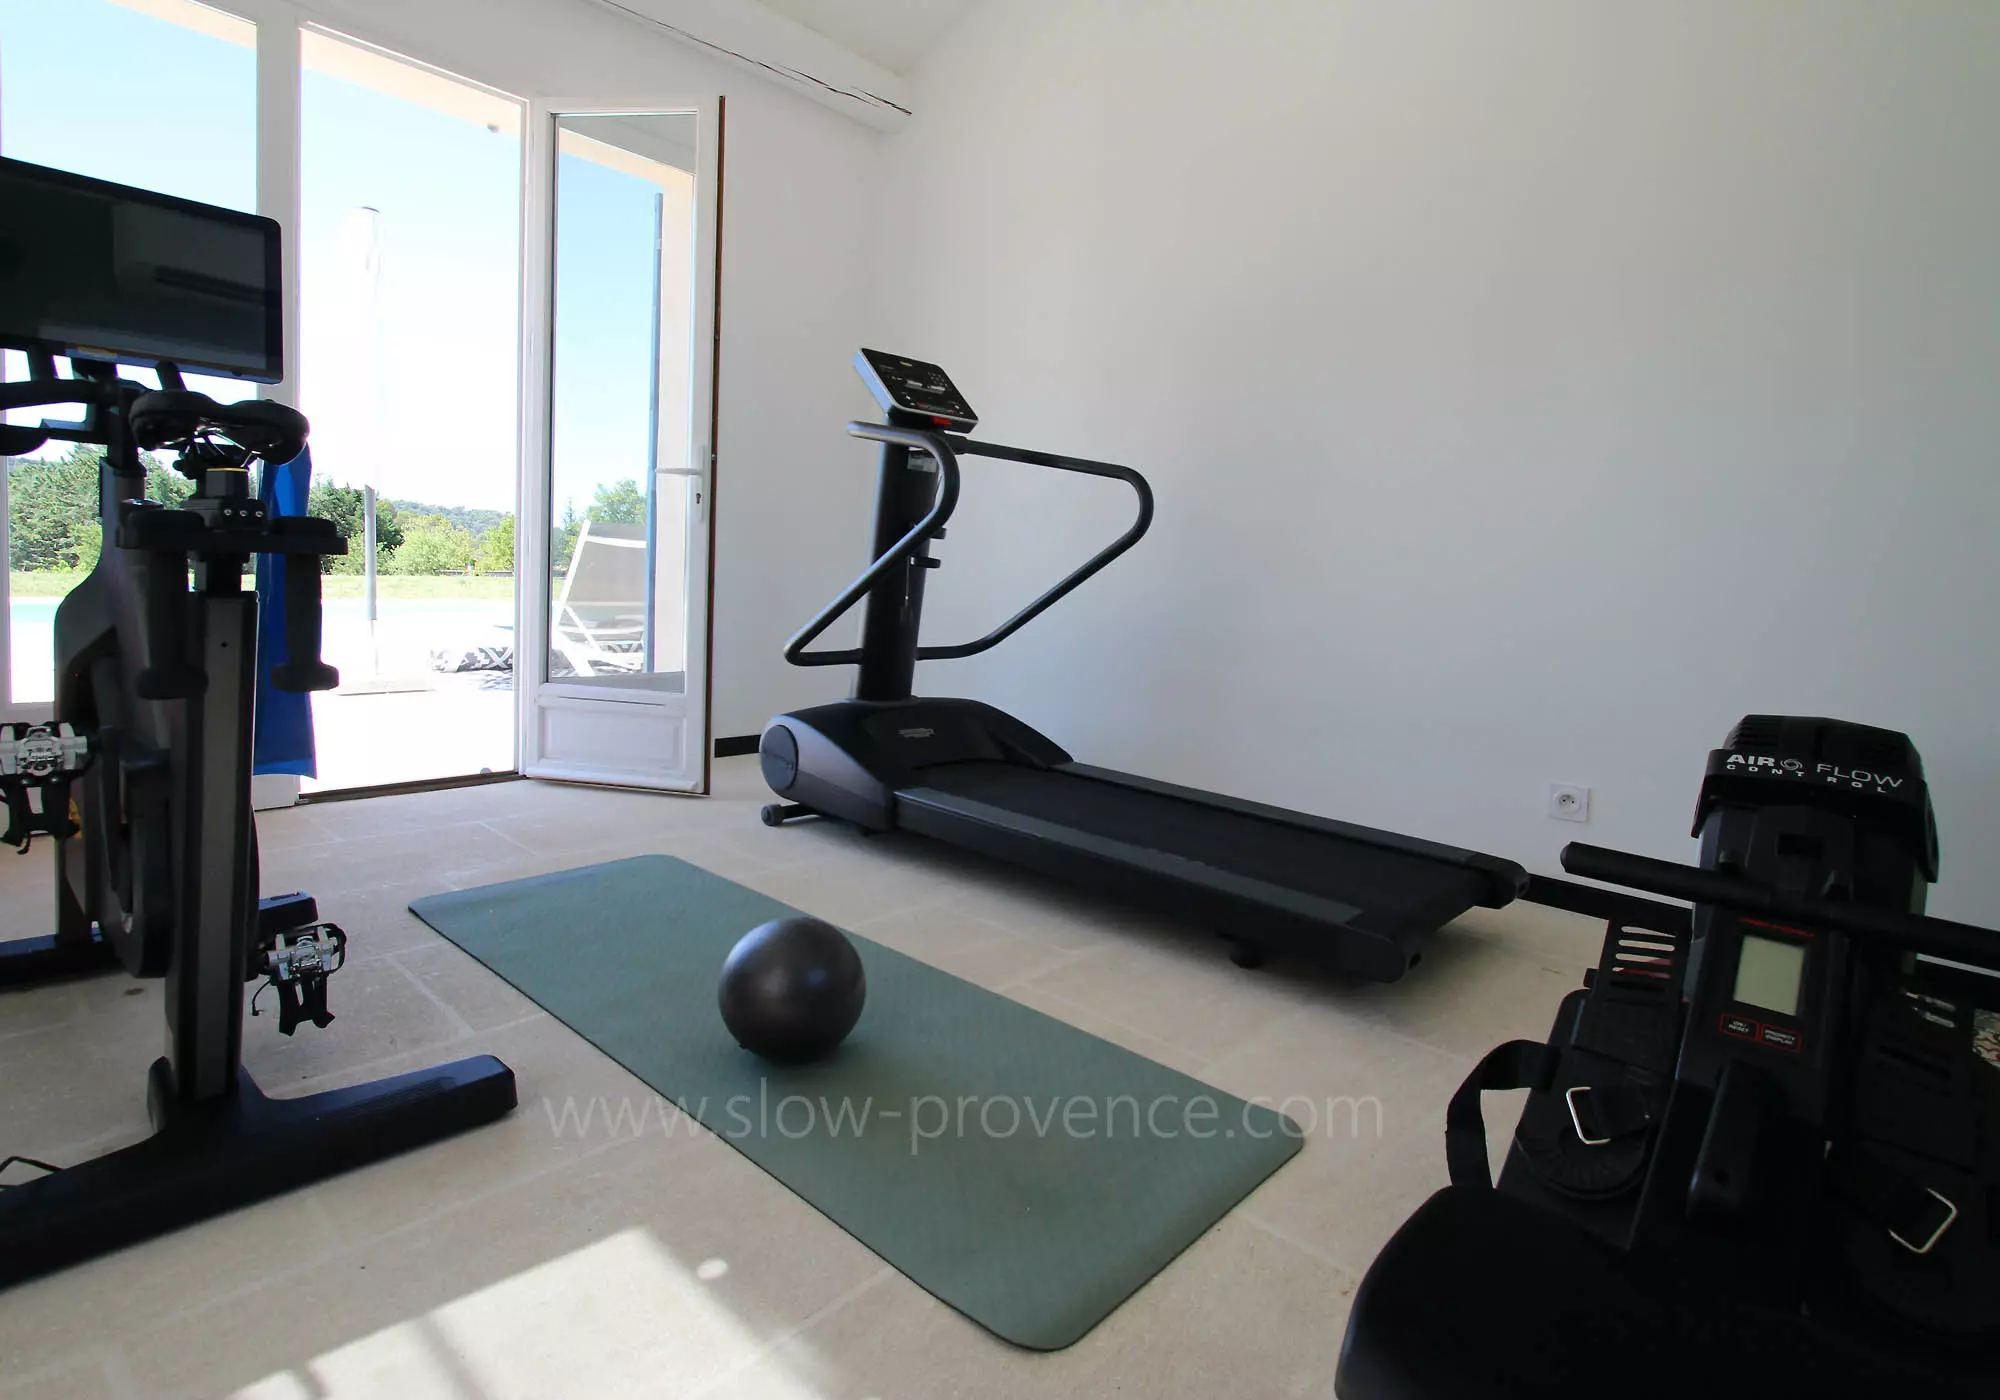 Fitness room next to the pool